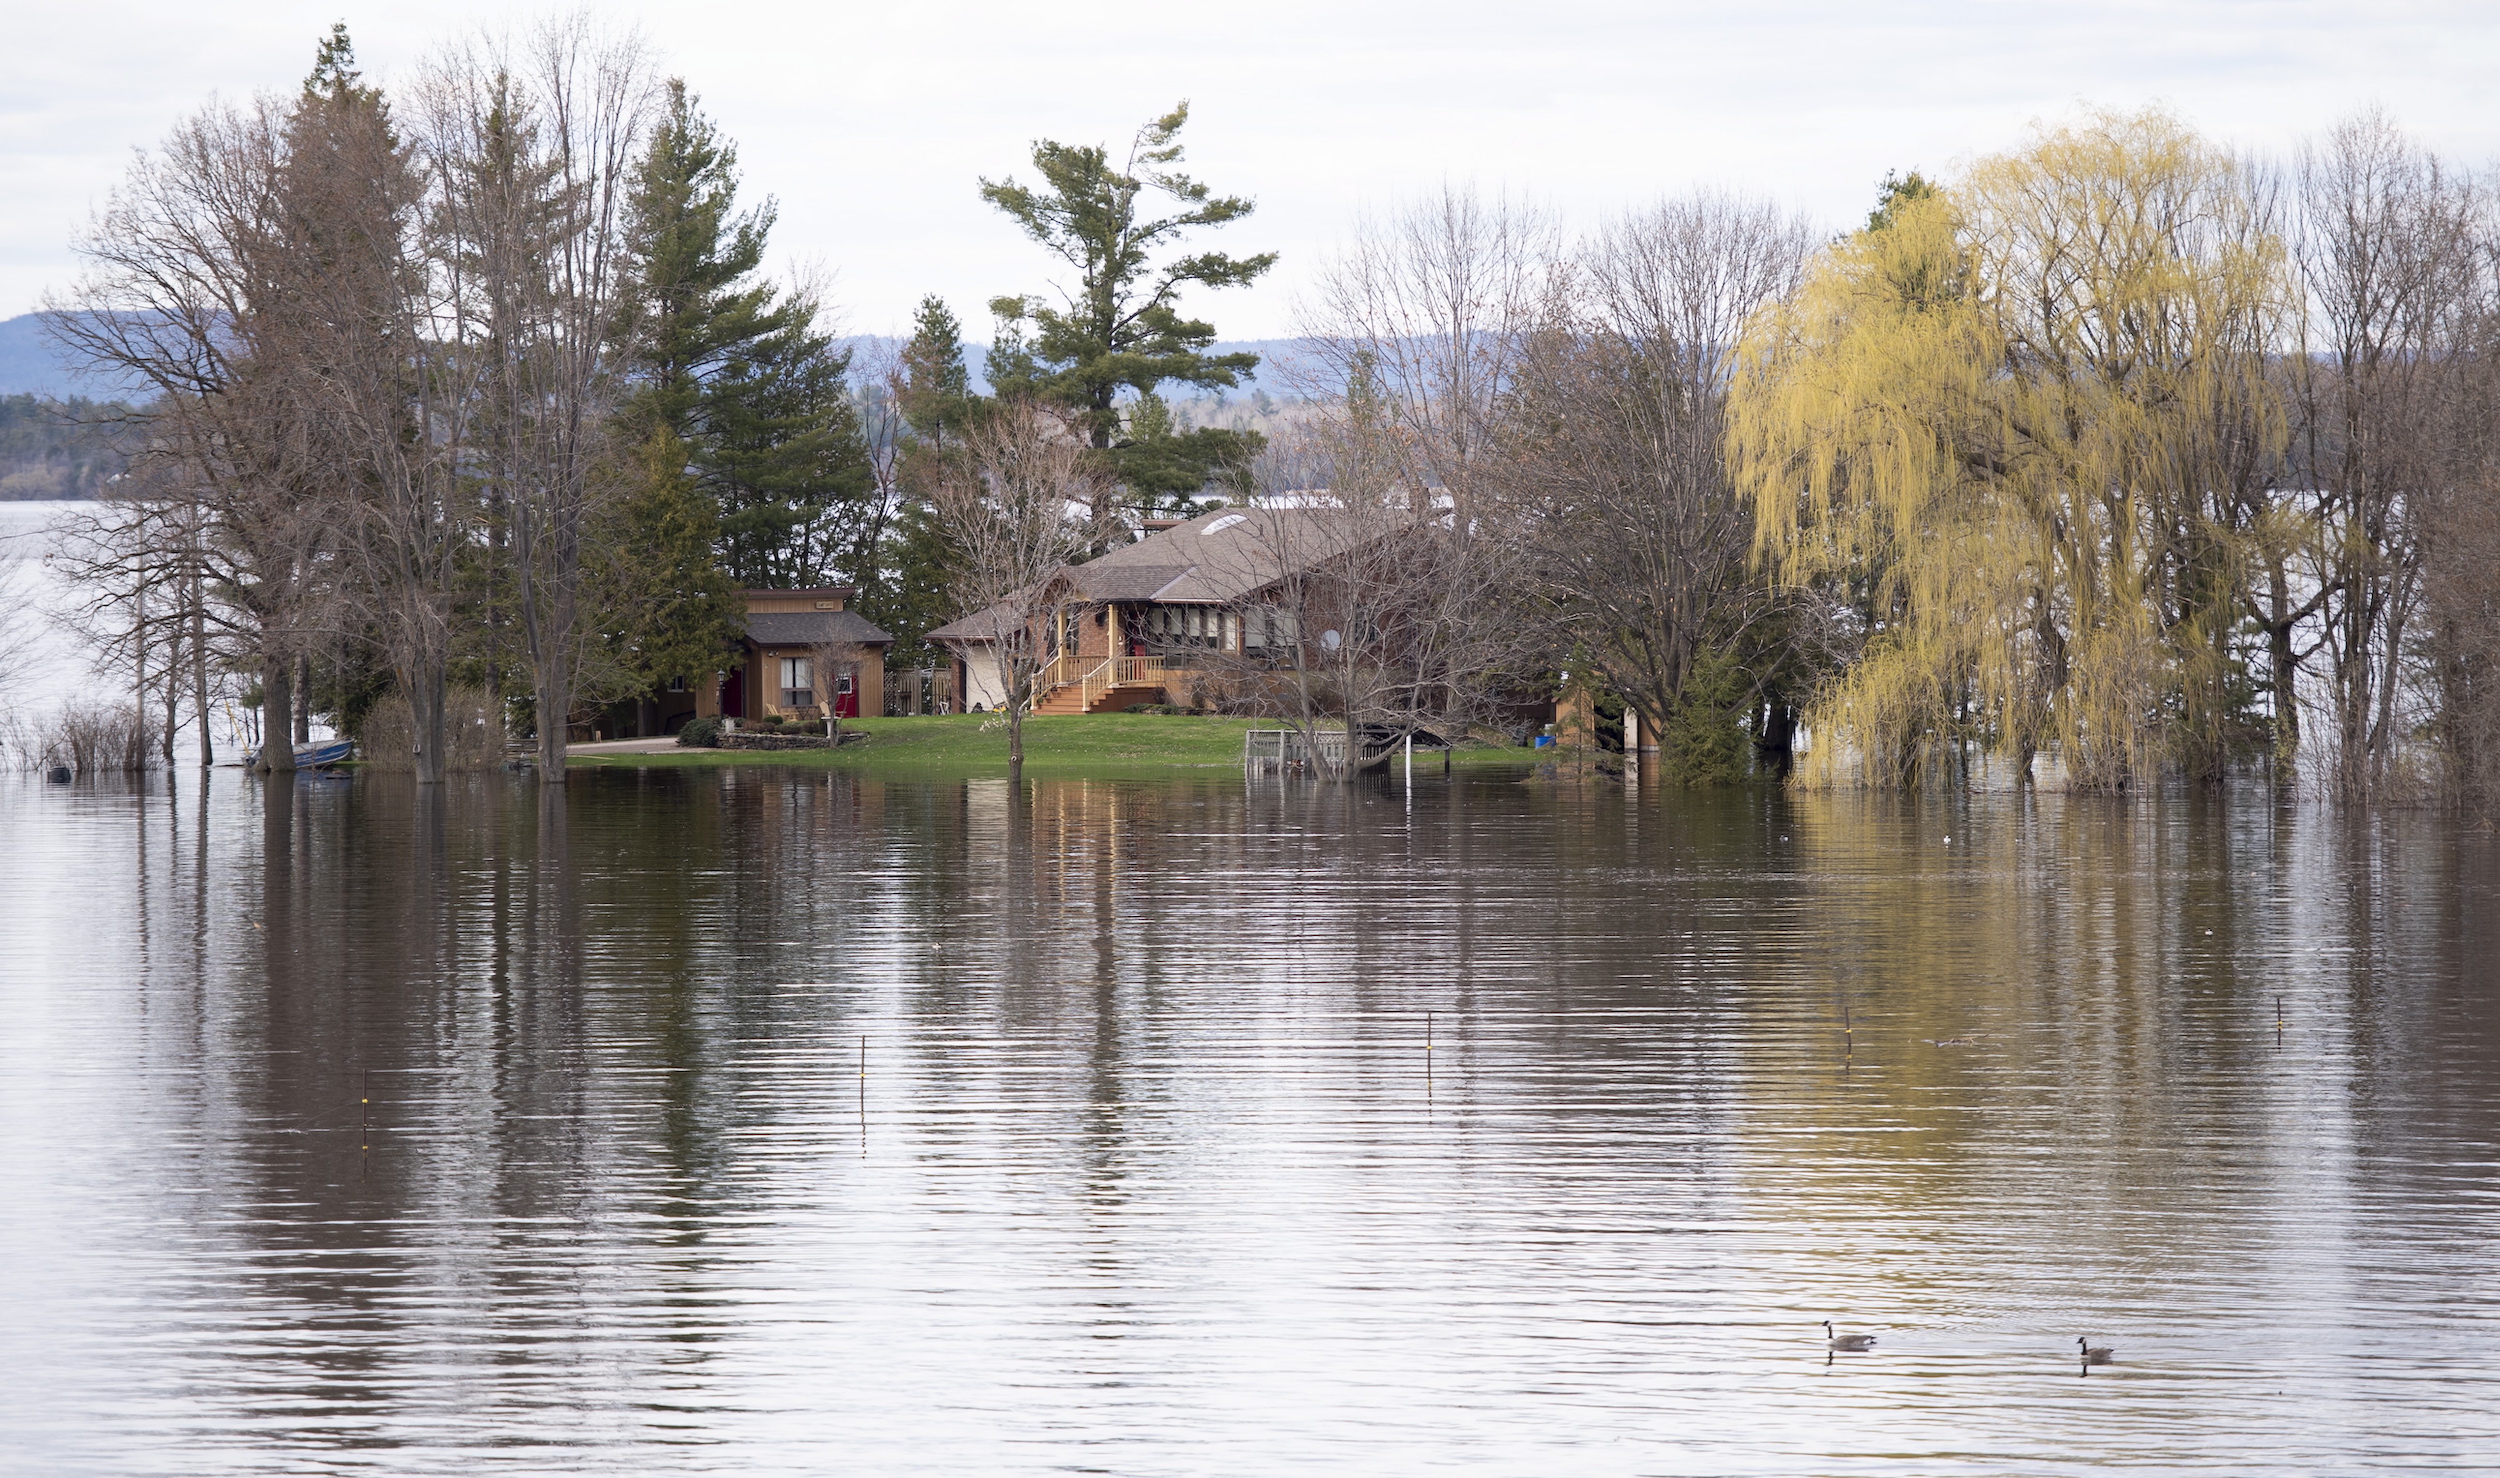 The federal government is leading a three-year, $63.8 million flood hazard identification and mapping program. The goal is to provide Canadians with better information on their flood risk and, eventually, affordable insurance or help to relocate.